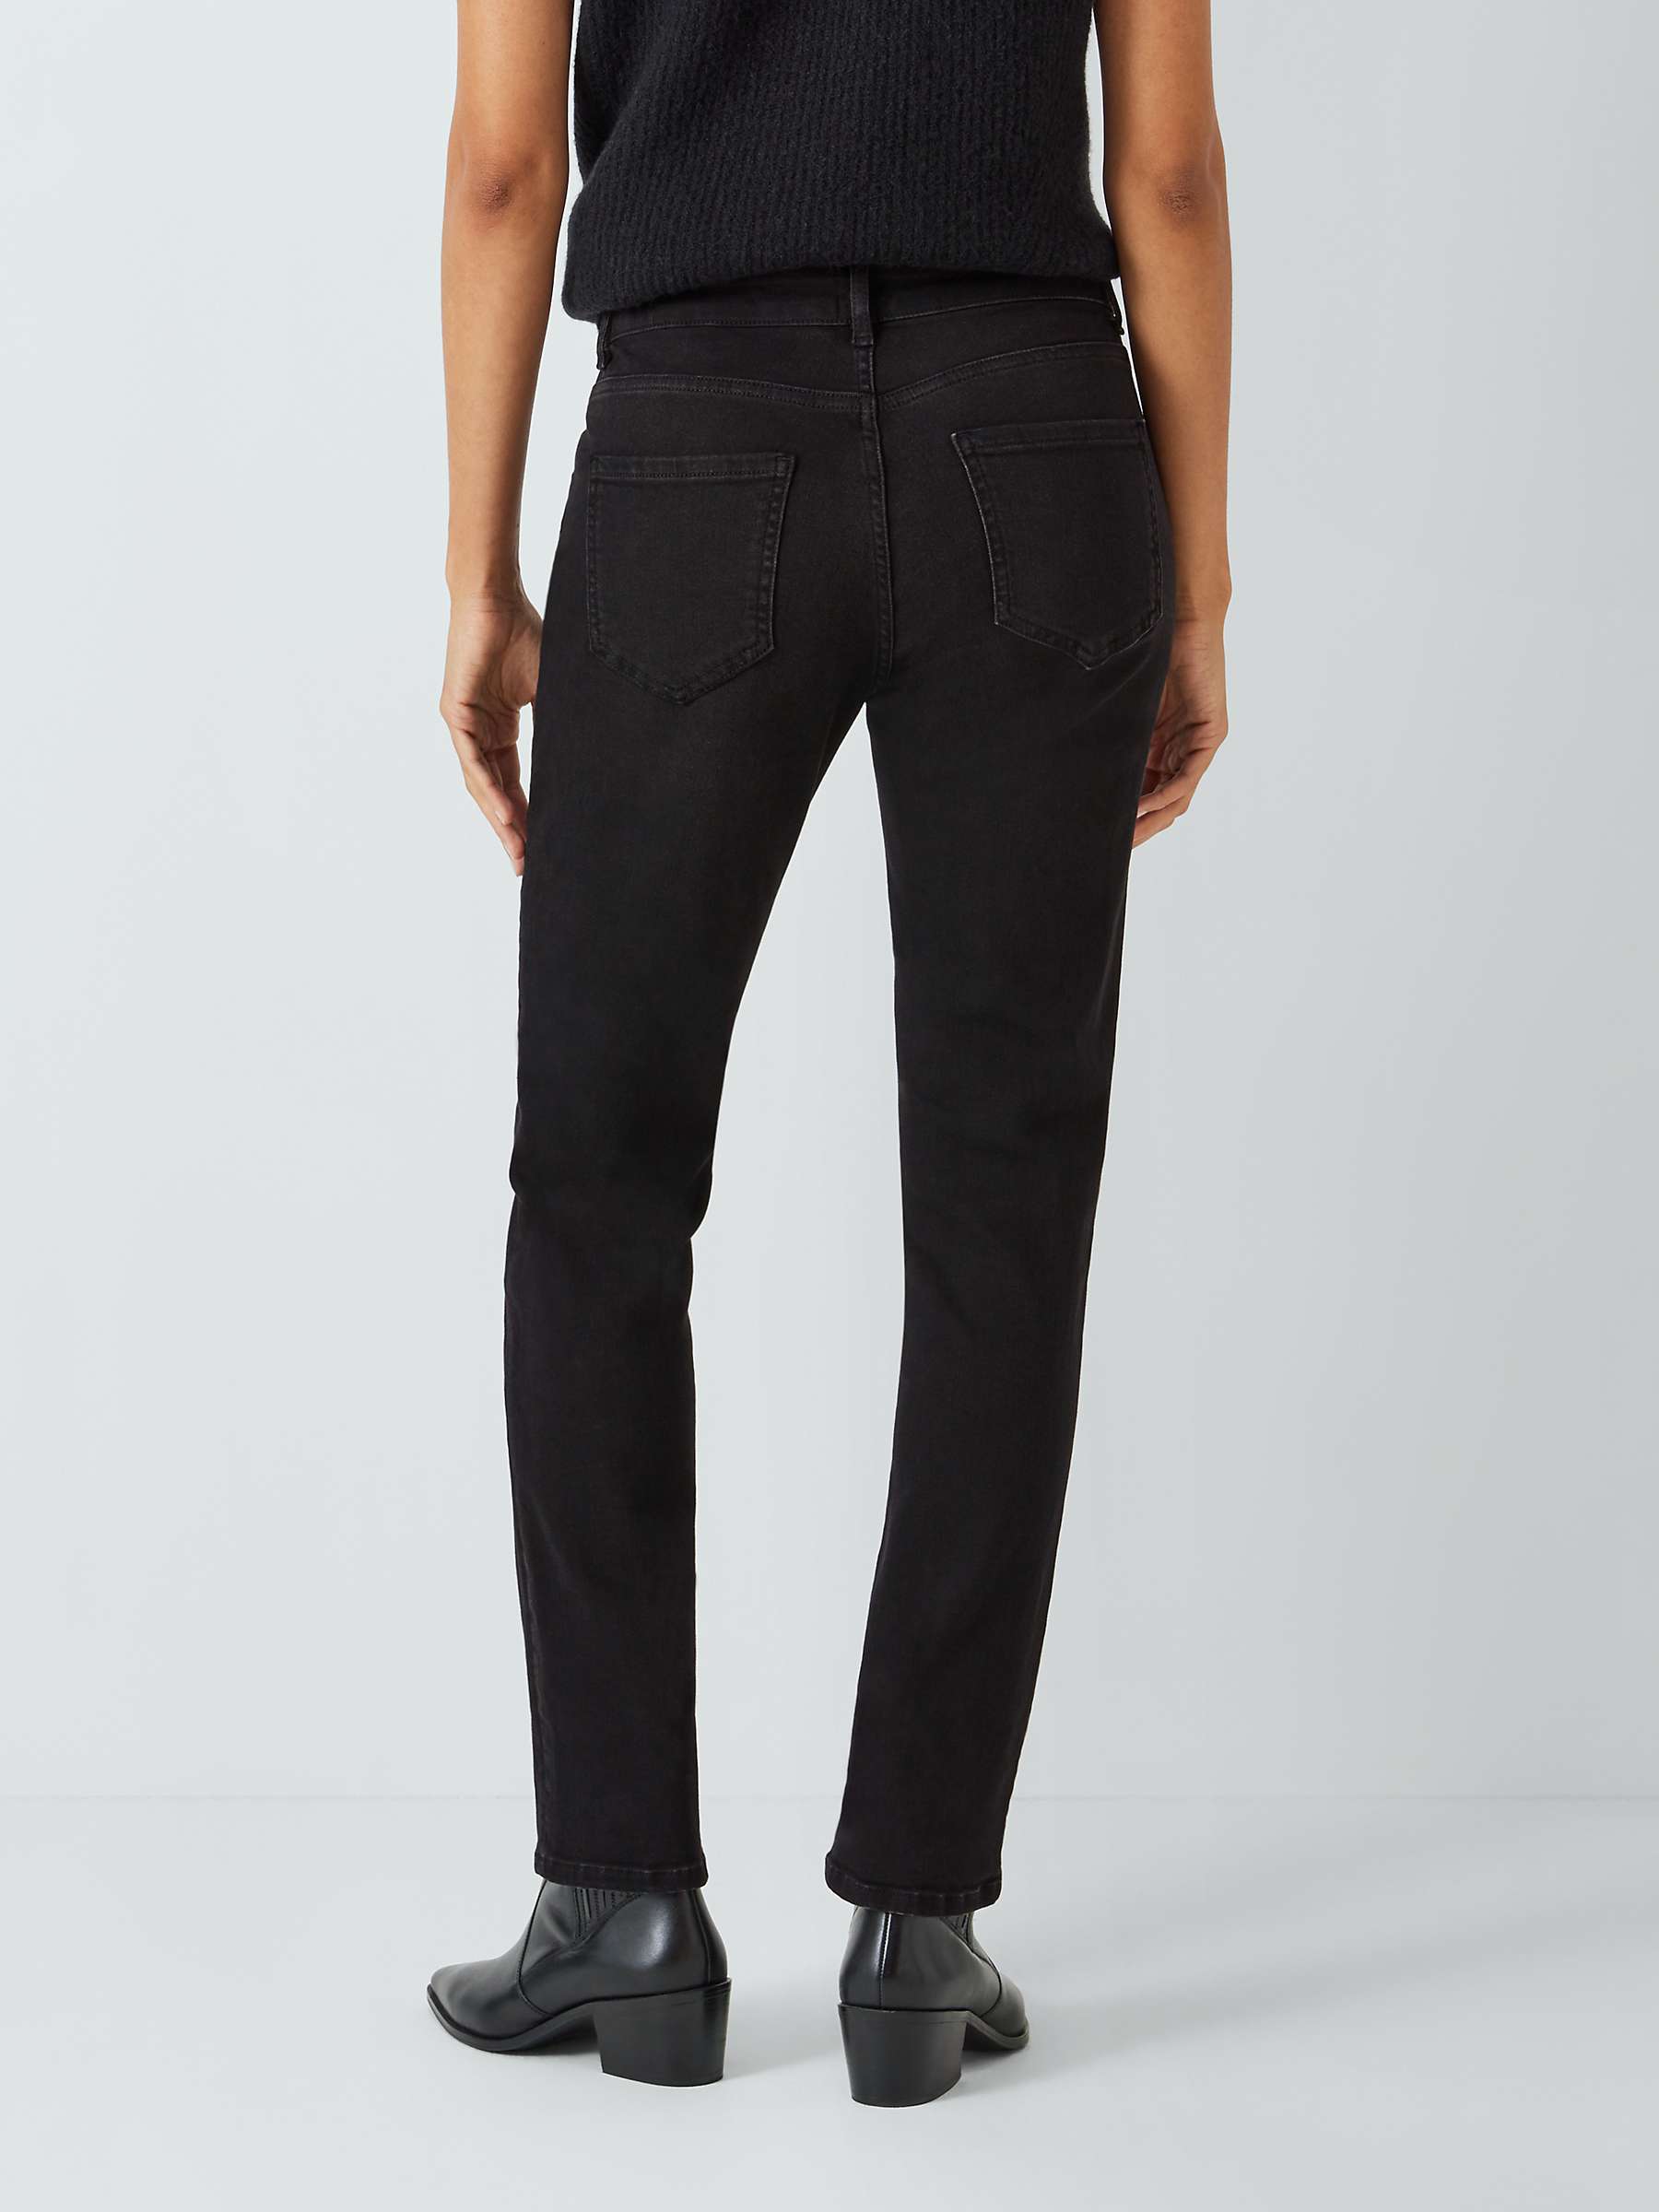 Buy AND/OR Silverlake Straight Cut Jeans, Washed Black Online at johnlewis.com